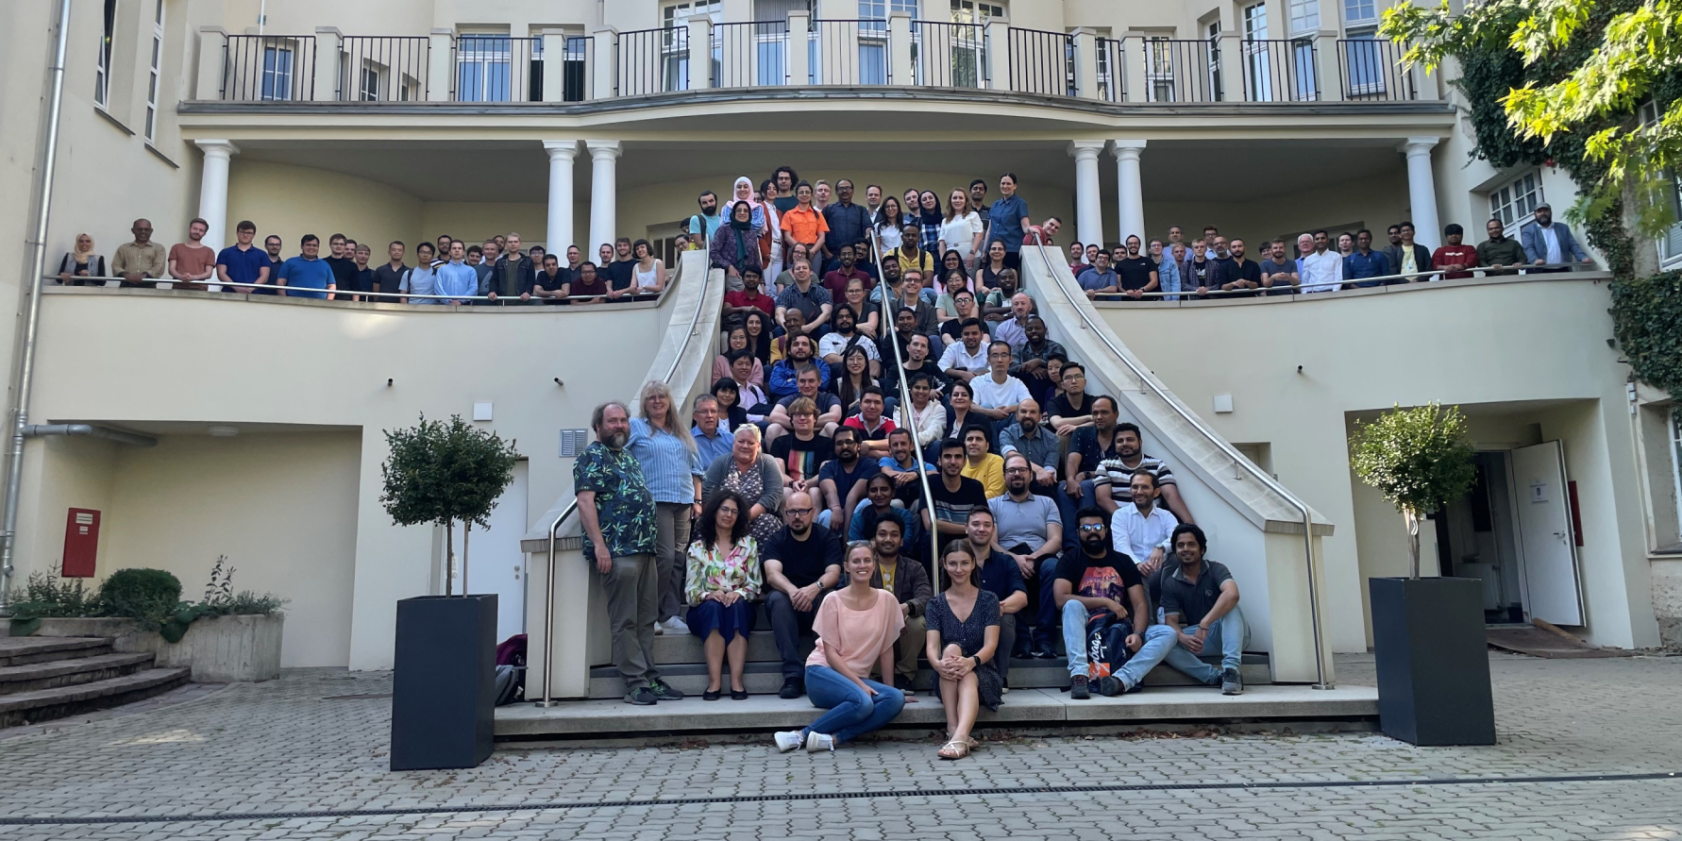 Group picture taken at L3S Retreat 2022 in Goslar